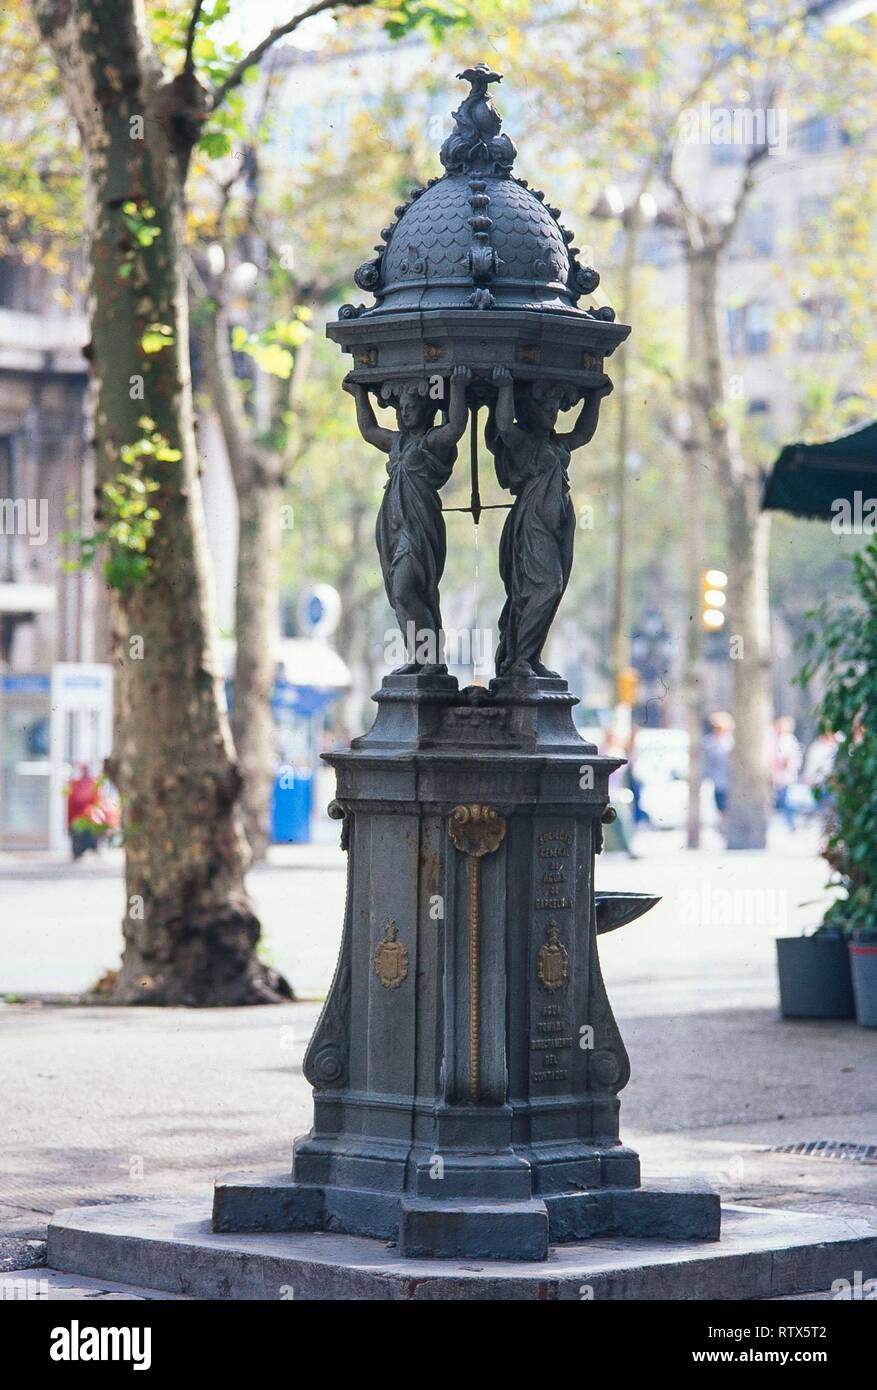 Fuente Wallace, Siglo XIX, Barcelona. Author: LEBOURG, CHARLES-AUGUSTE. Stock Photo